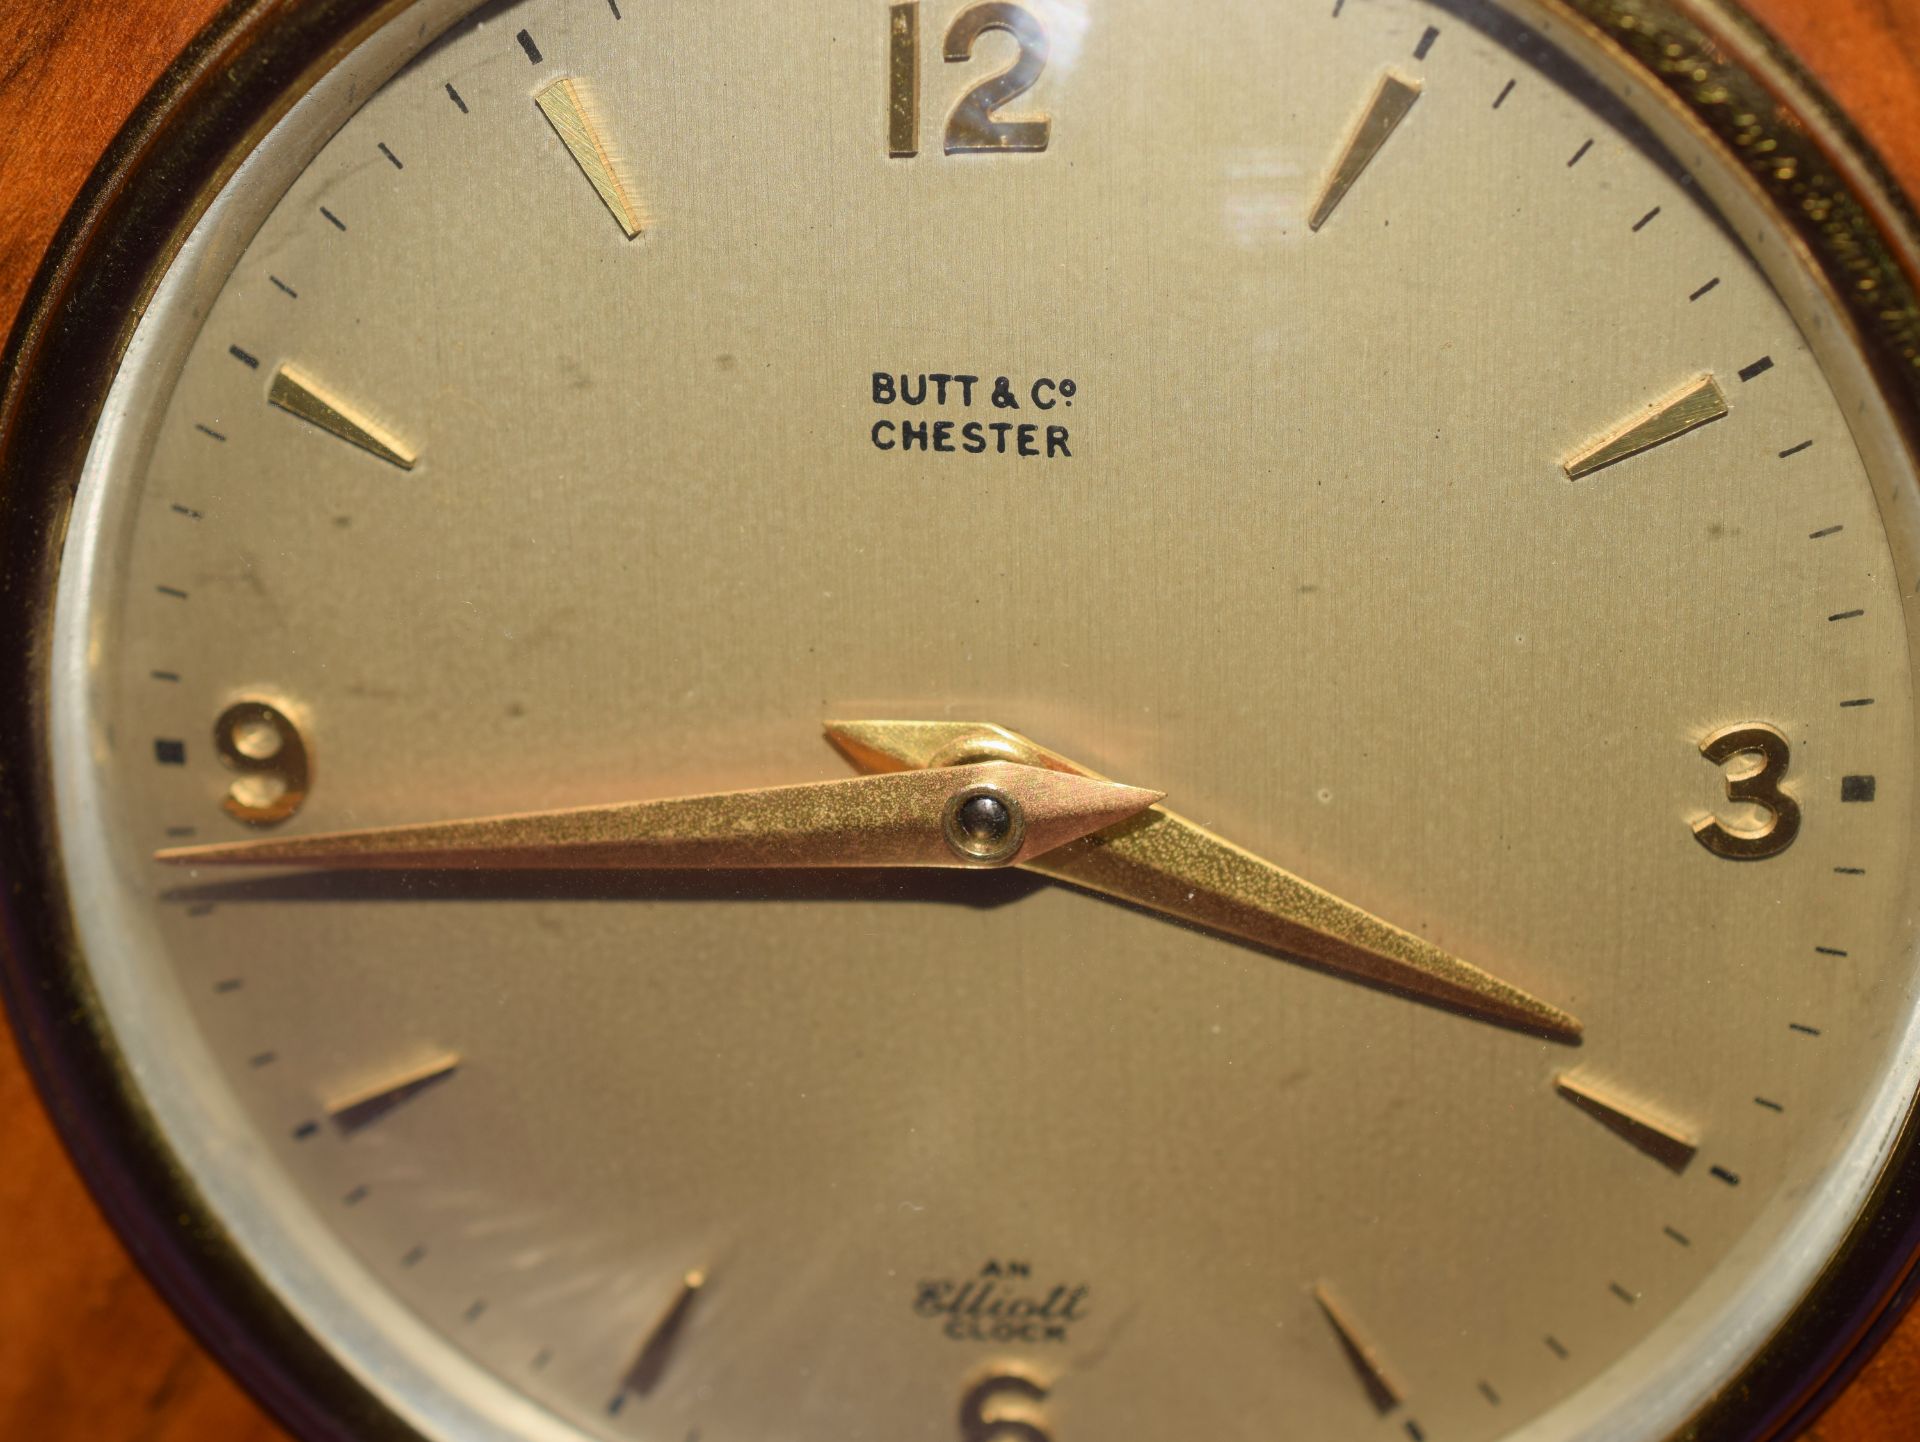 Mid 20th Century Elliot Clock Signed Butt & Co Chester - Image 3 of 5